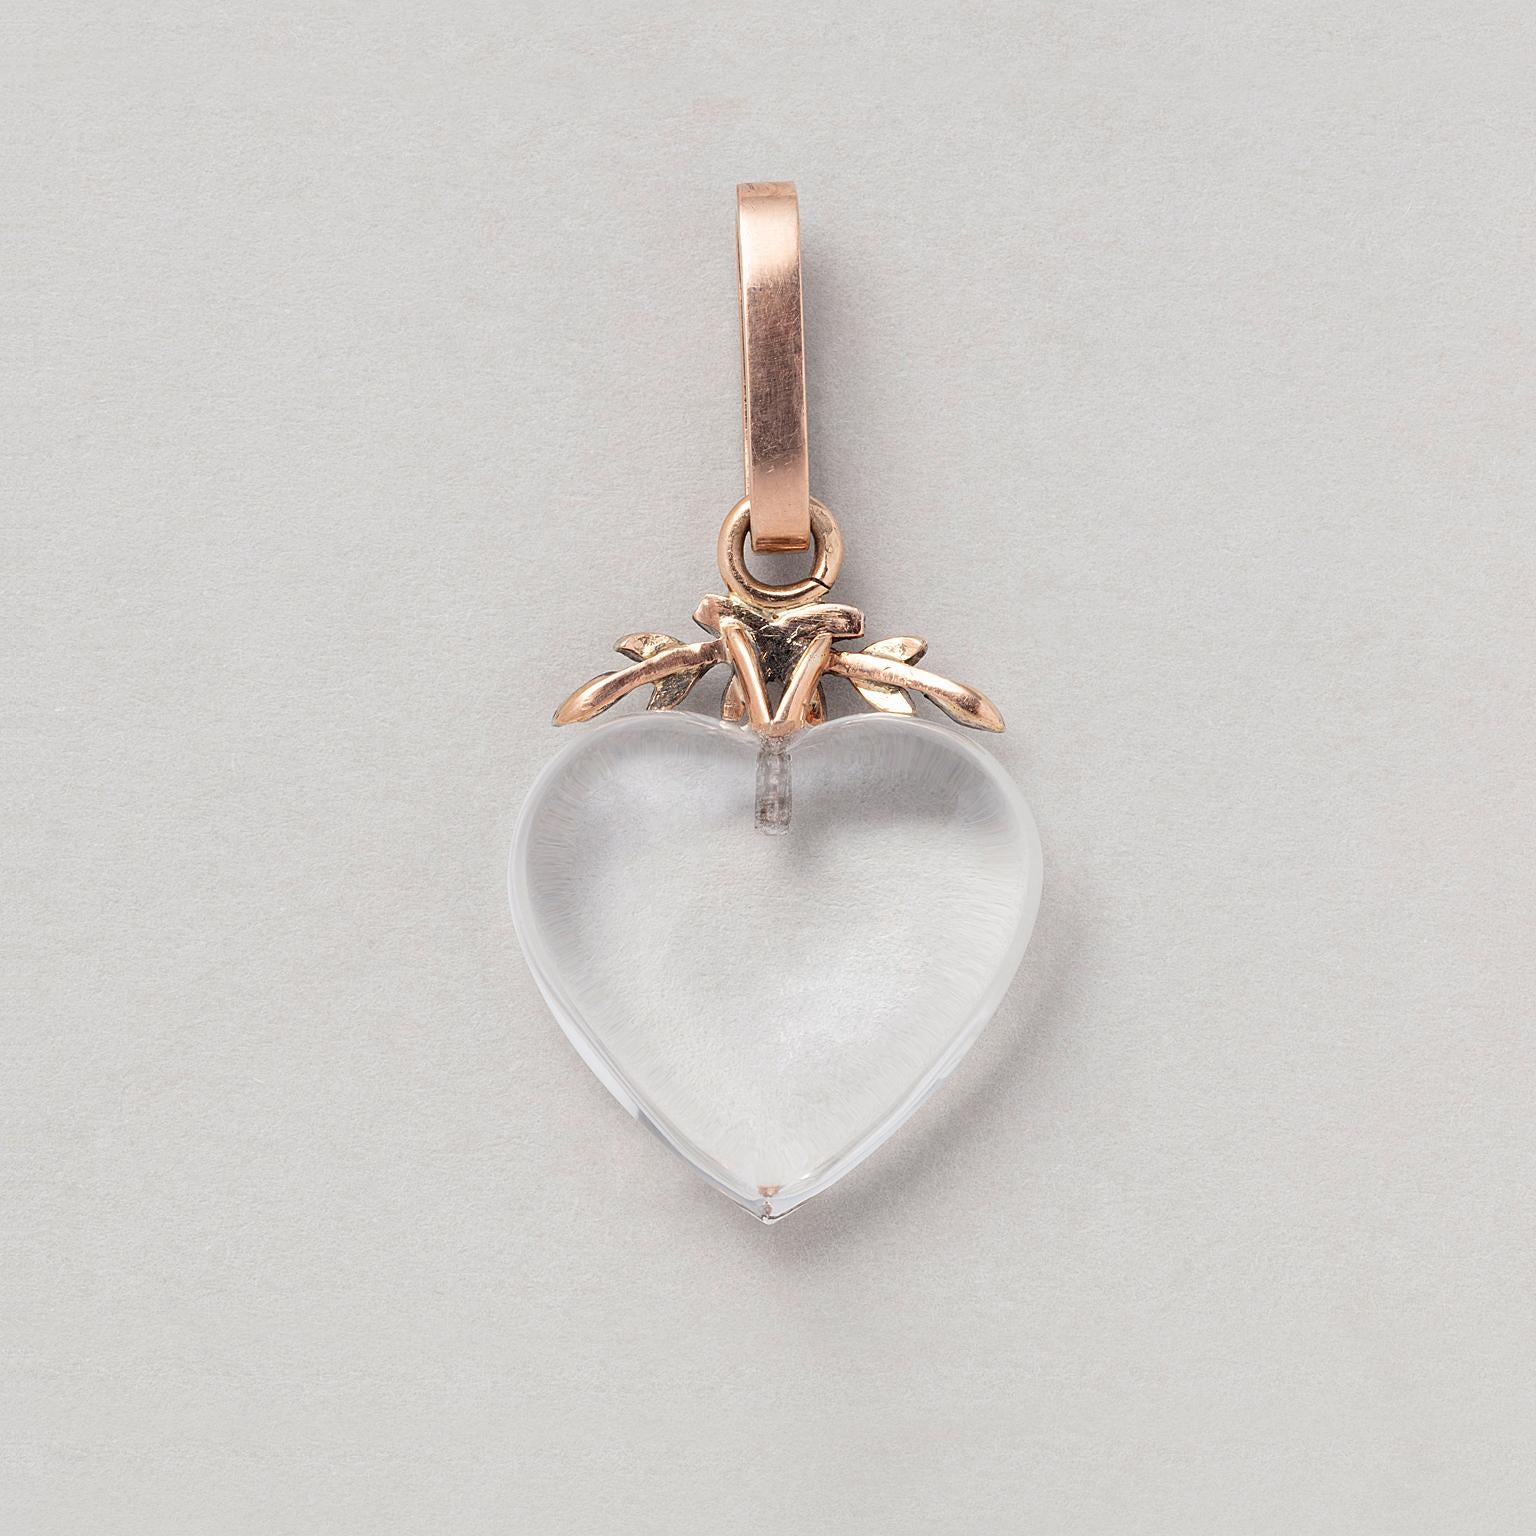 Victorian An Antique Gold and Silver Heart Pendant with Rock Crystal and diamondsDiamond For Sale